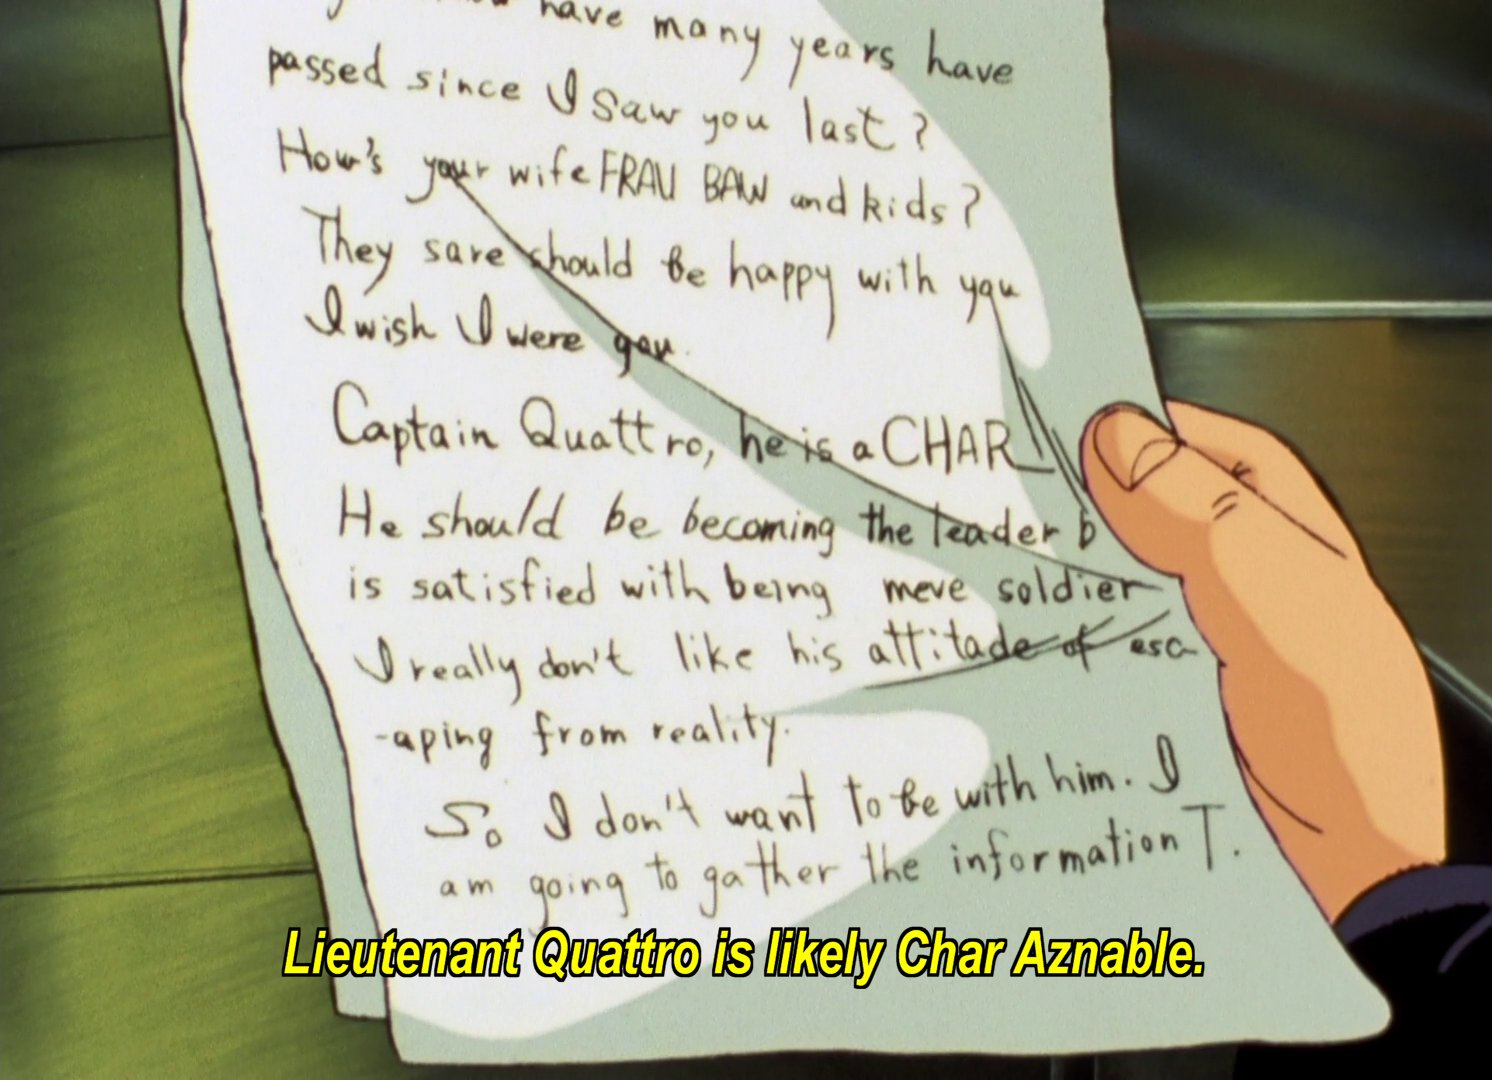 Letter continued: So I don't want to be with him.  I am going to gather the information T.  Subtitles from Kobayashi: Lieutenant Quattro is lively Char Aznable.